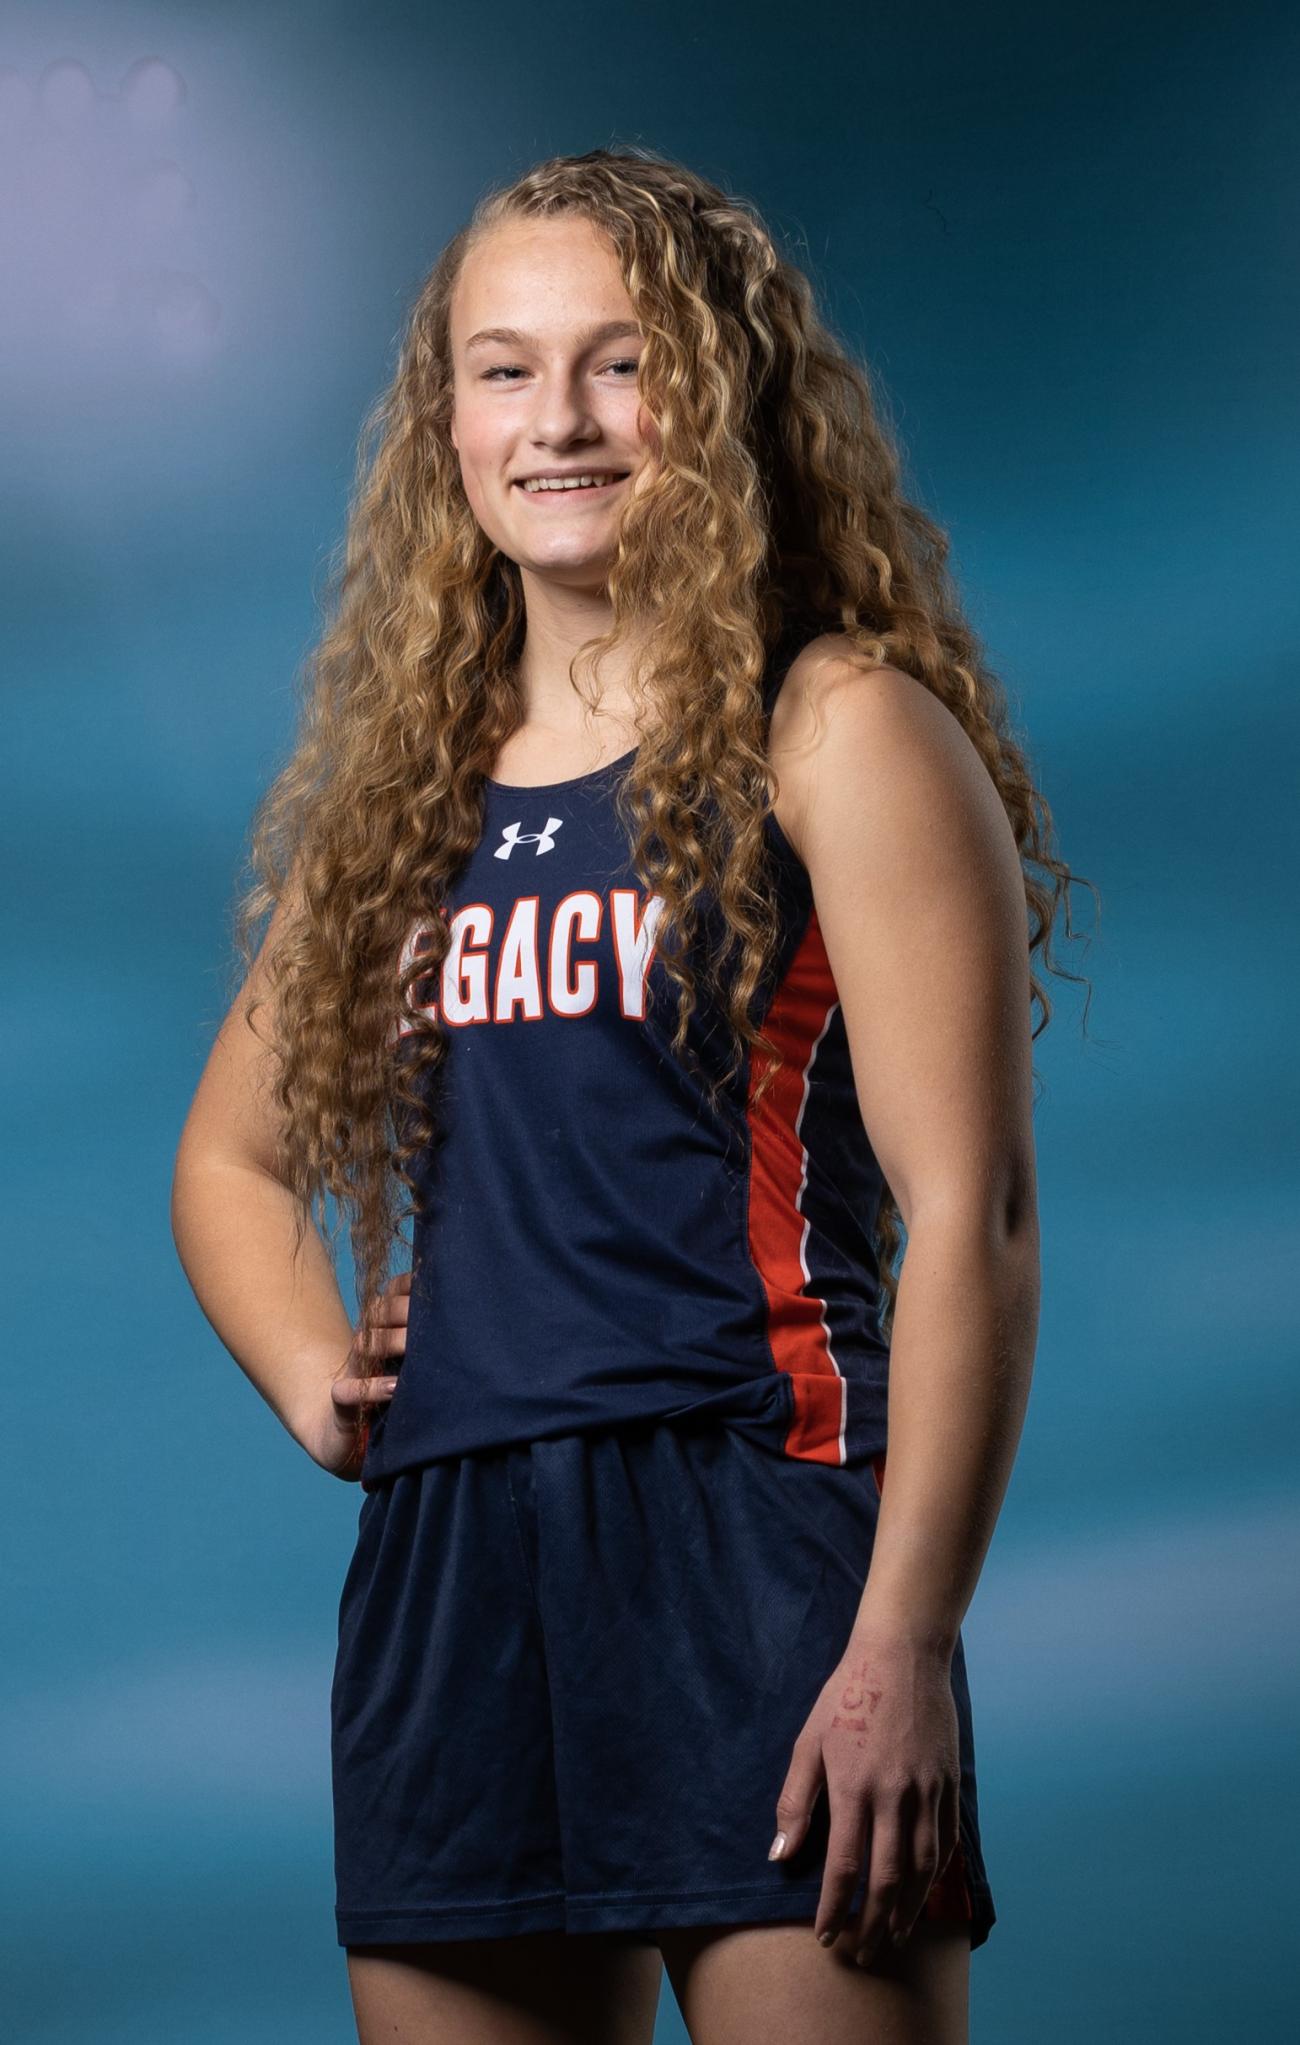 2022 Cecily Fager Champ Photo